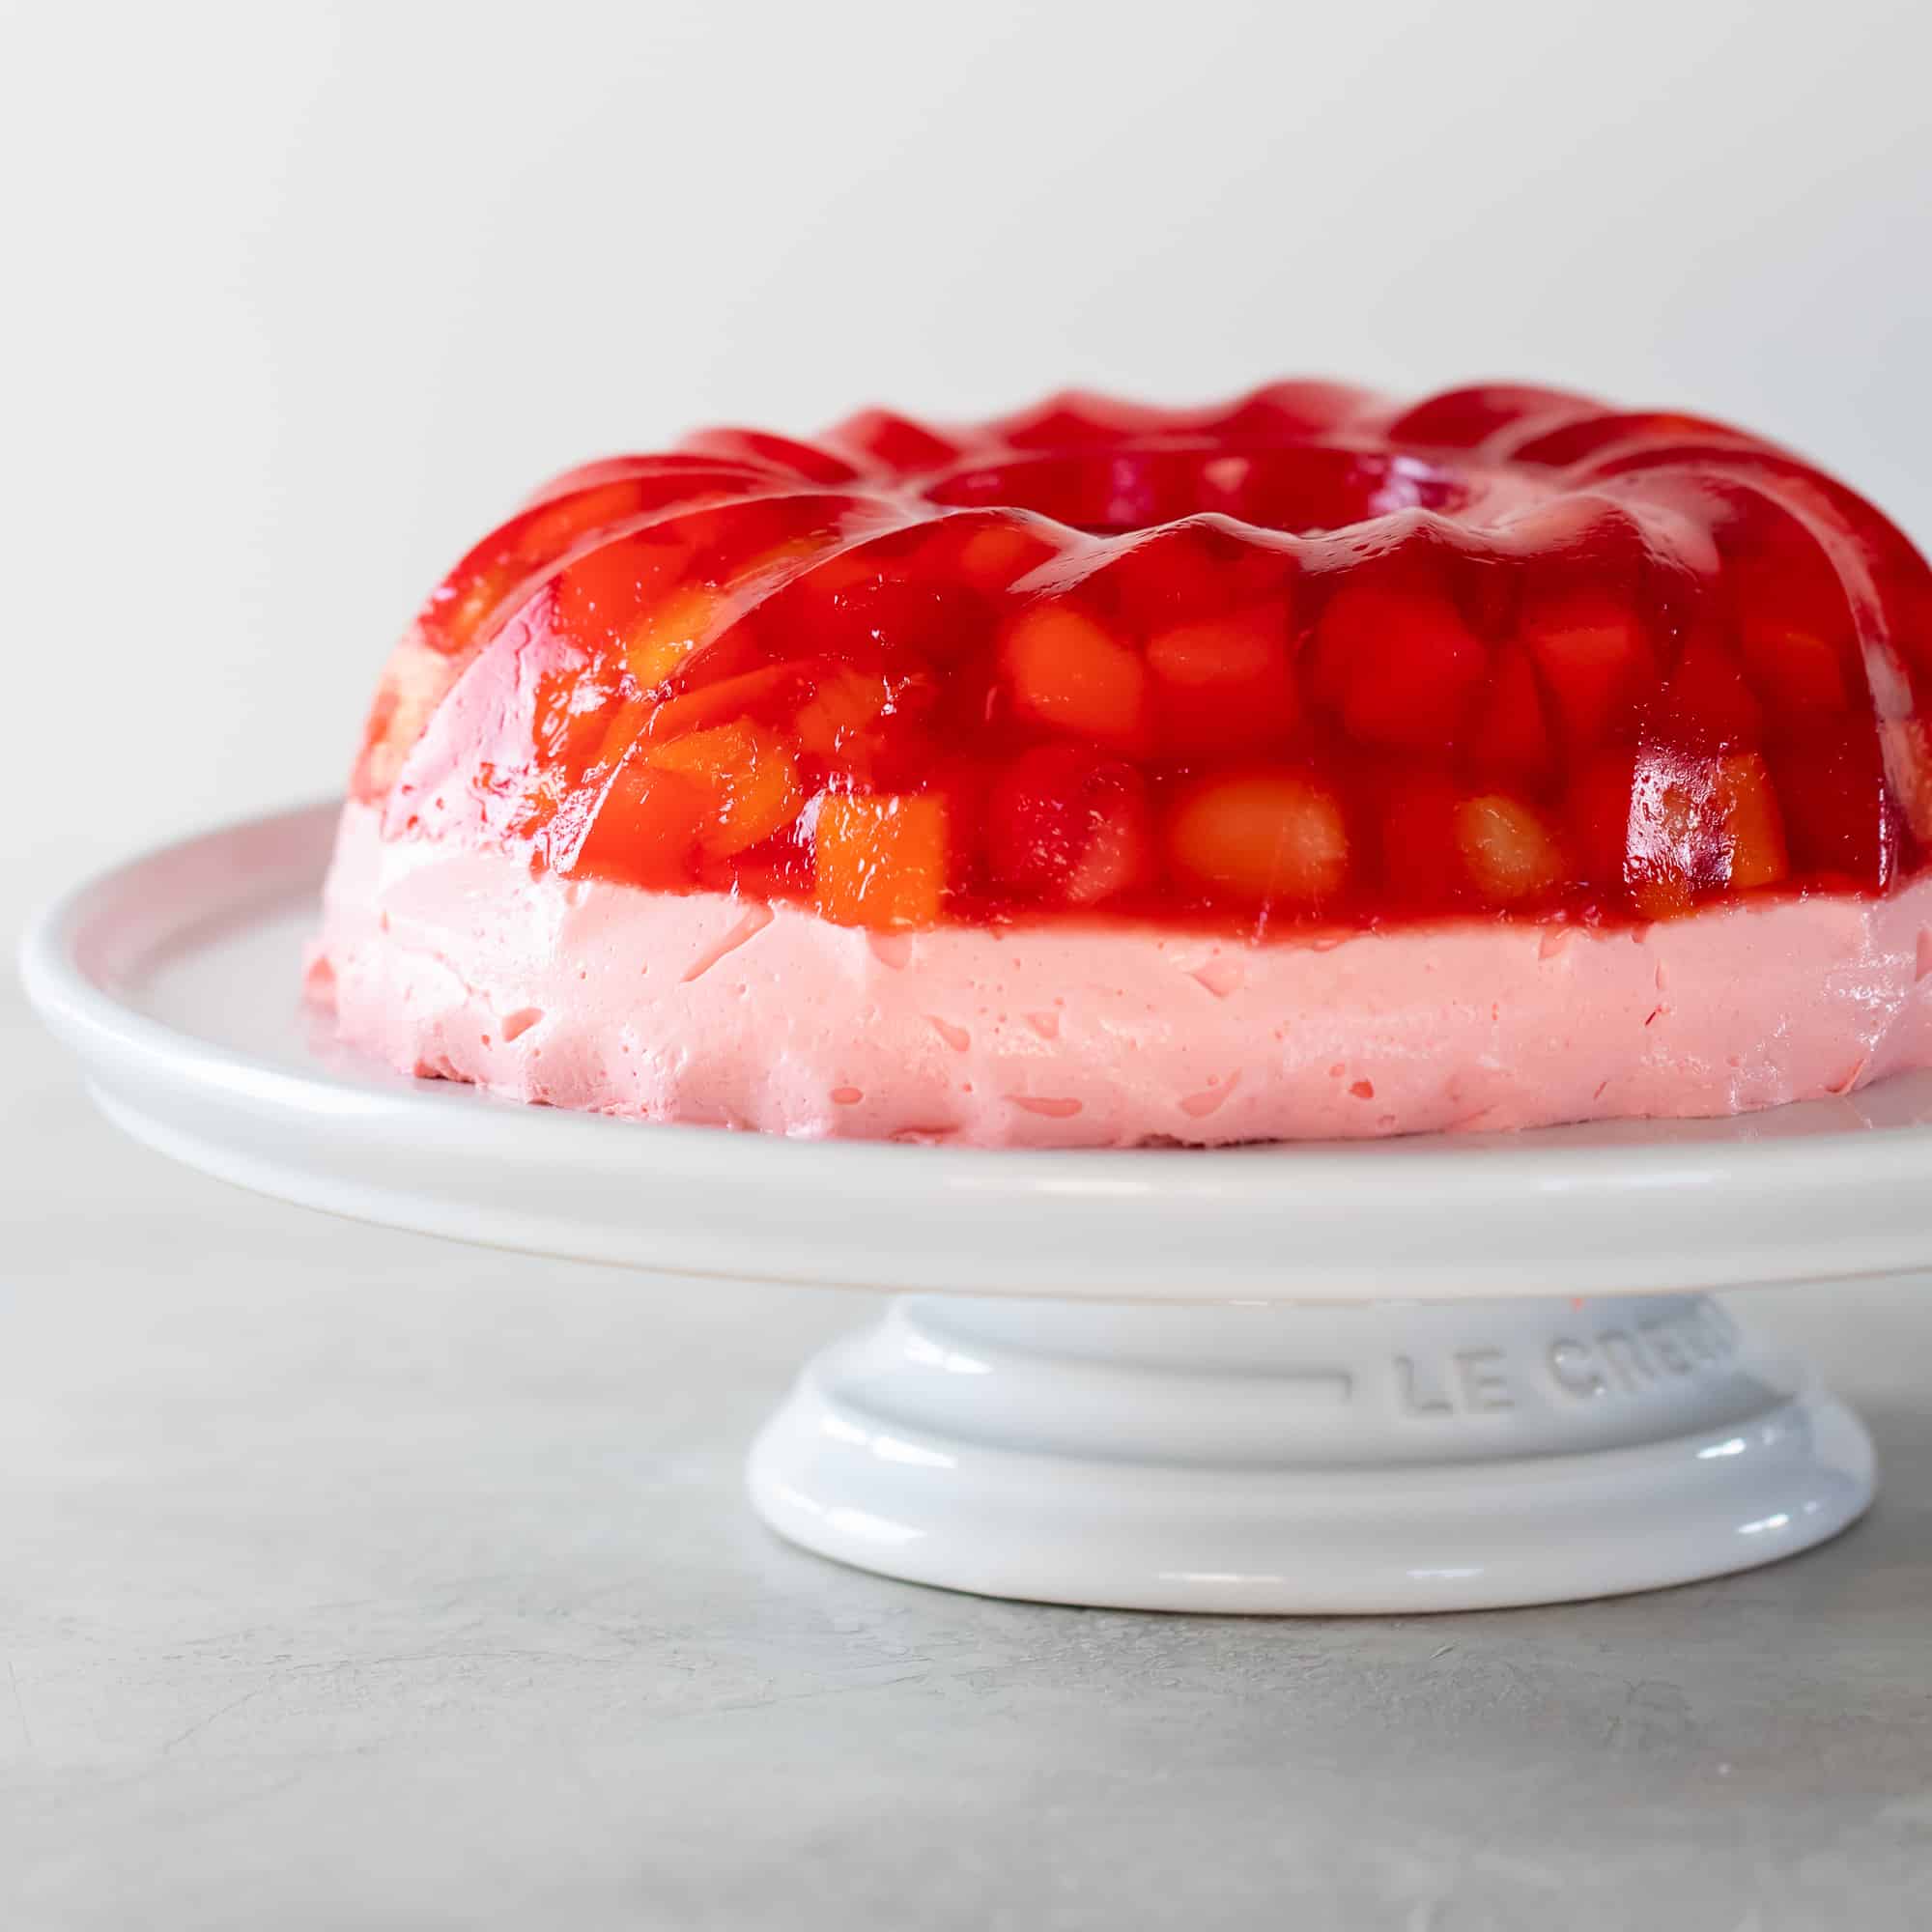 A close of of a jello mold ring on a cake stand.